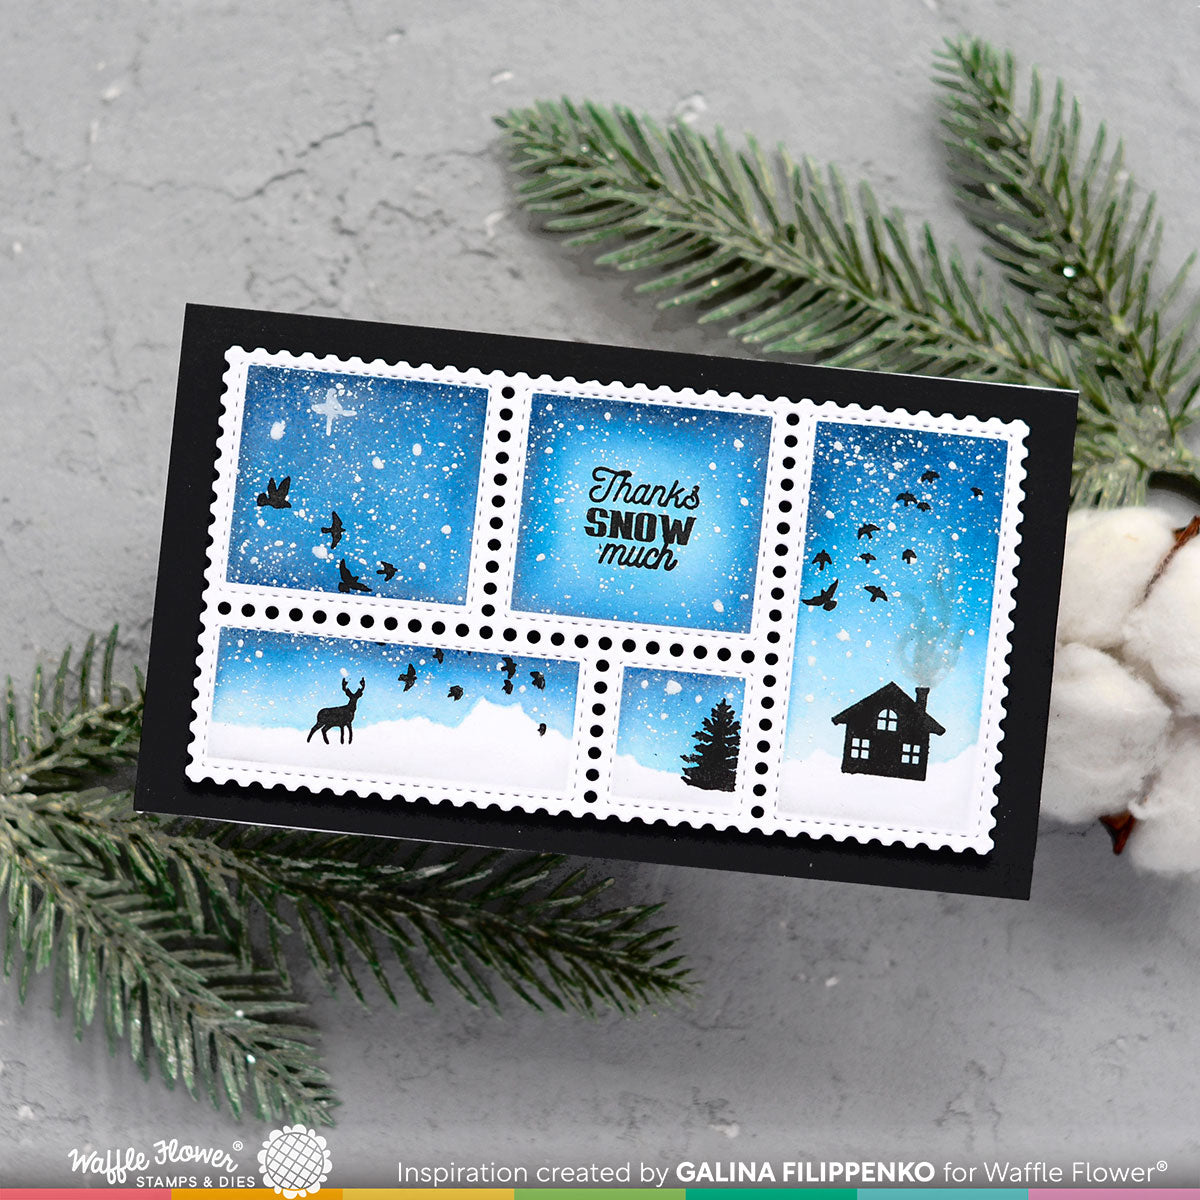 Stamp - TROTTINETTE 3 ROUES FROZEN II STAMP STAMP.RN244045